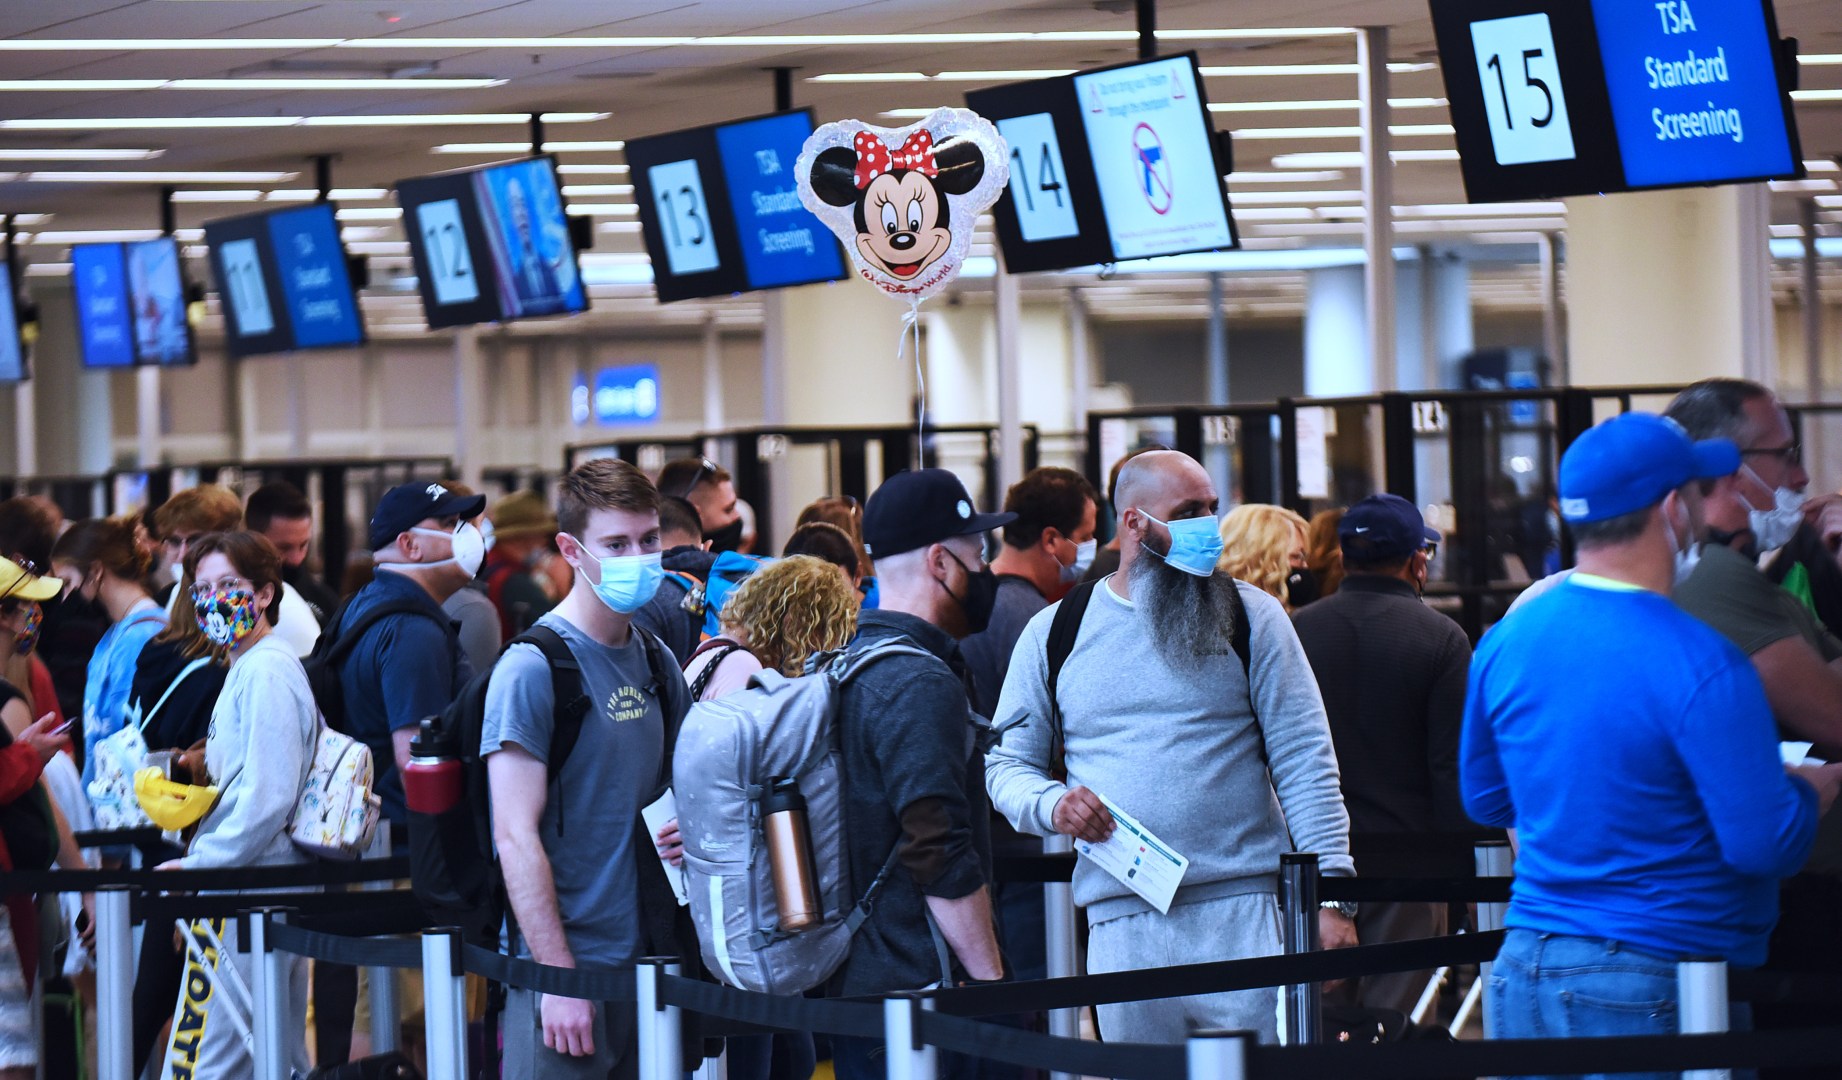 The TSA said it would extend its mask mandate for planes, buses, trains and transit hubs for one month to April 18, 2022.